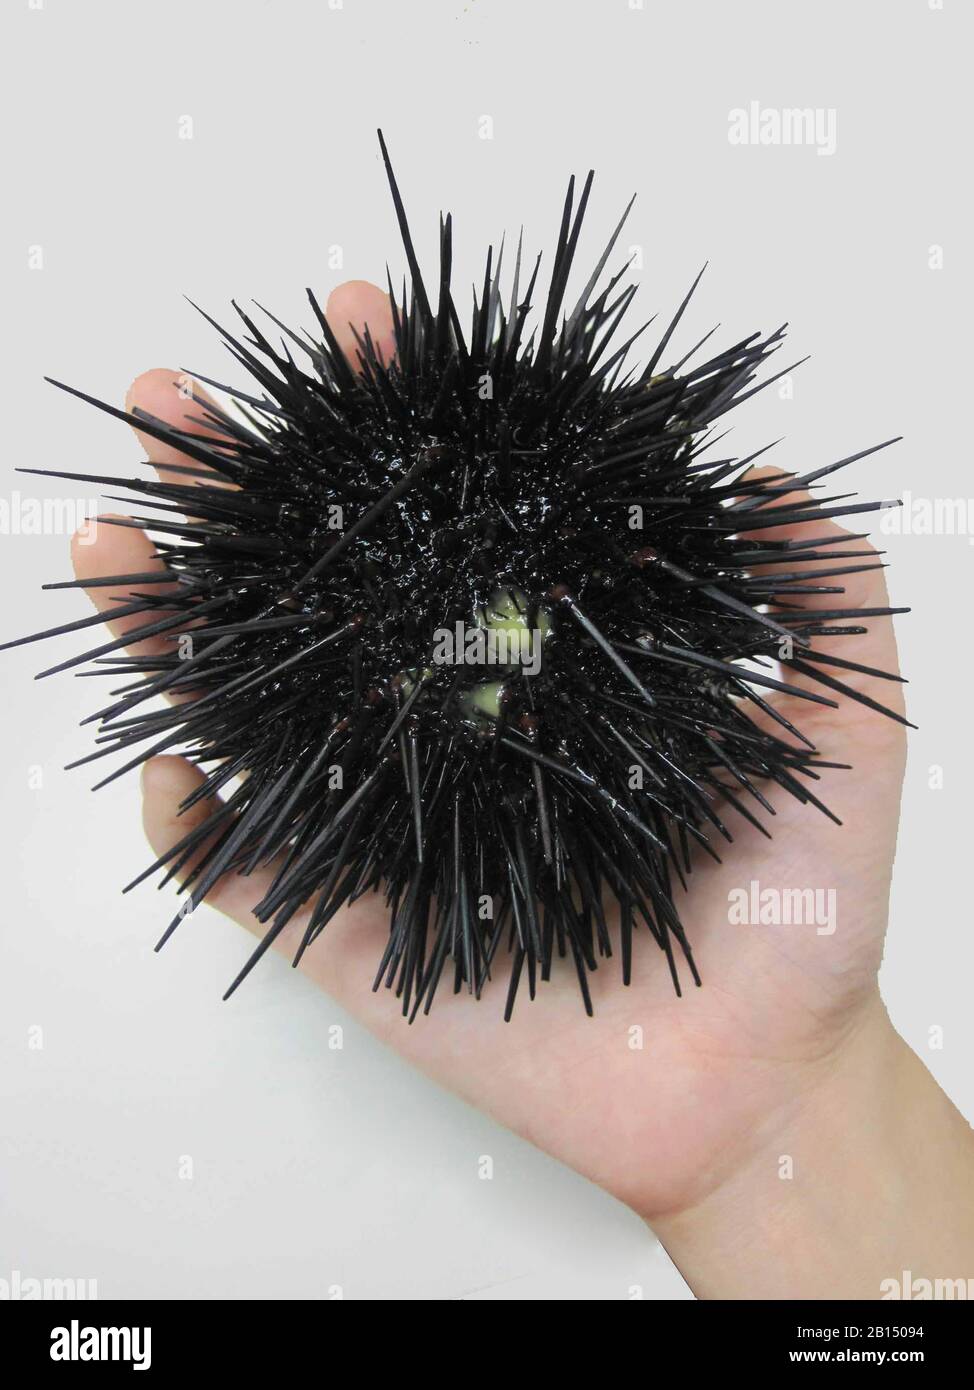 The best uni or sea urchins are said to come from Rishiri and Rebun islands in Hokkaido.  This delicacy is commonly prepeared as sashimi or sushi. Stock Photo